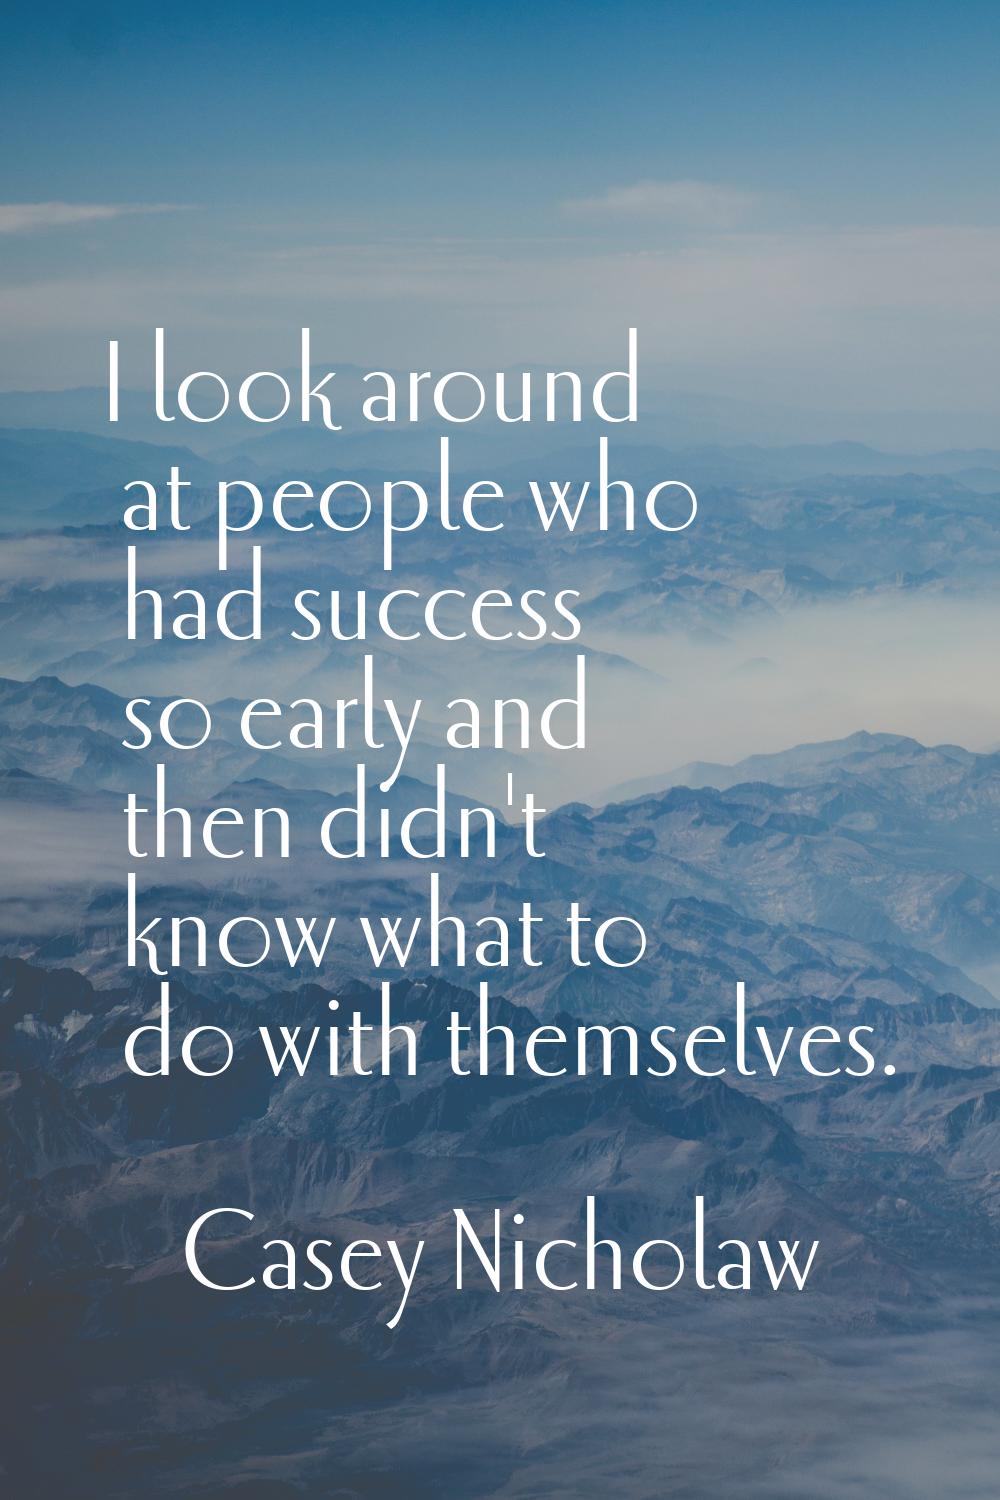 I look around at people who had success so early and then didn't know what to do with themselves.